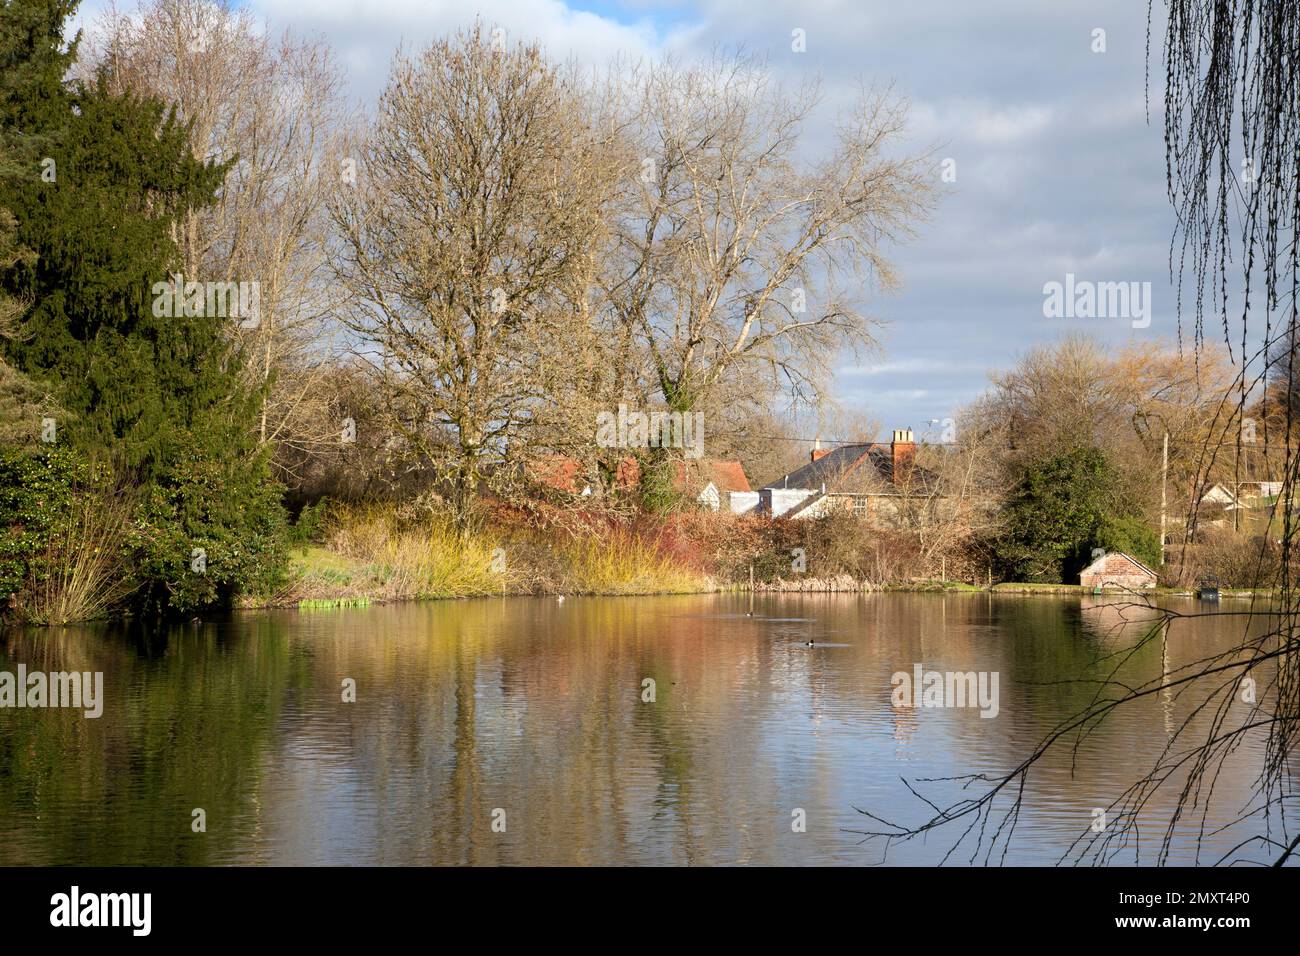 The pond in the small village of Ansty, in the Nadder Valley, Wiltshire. Stock Photo